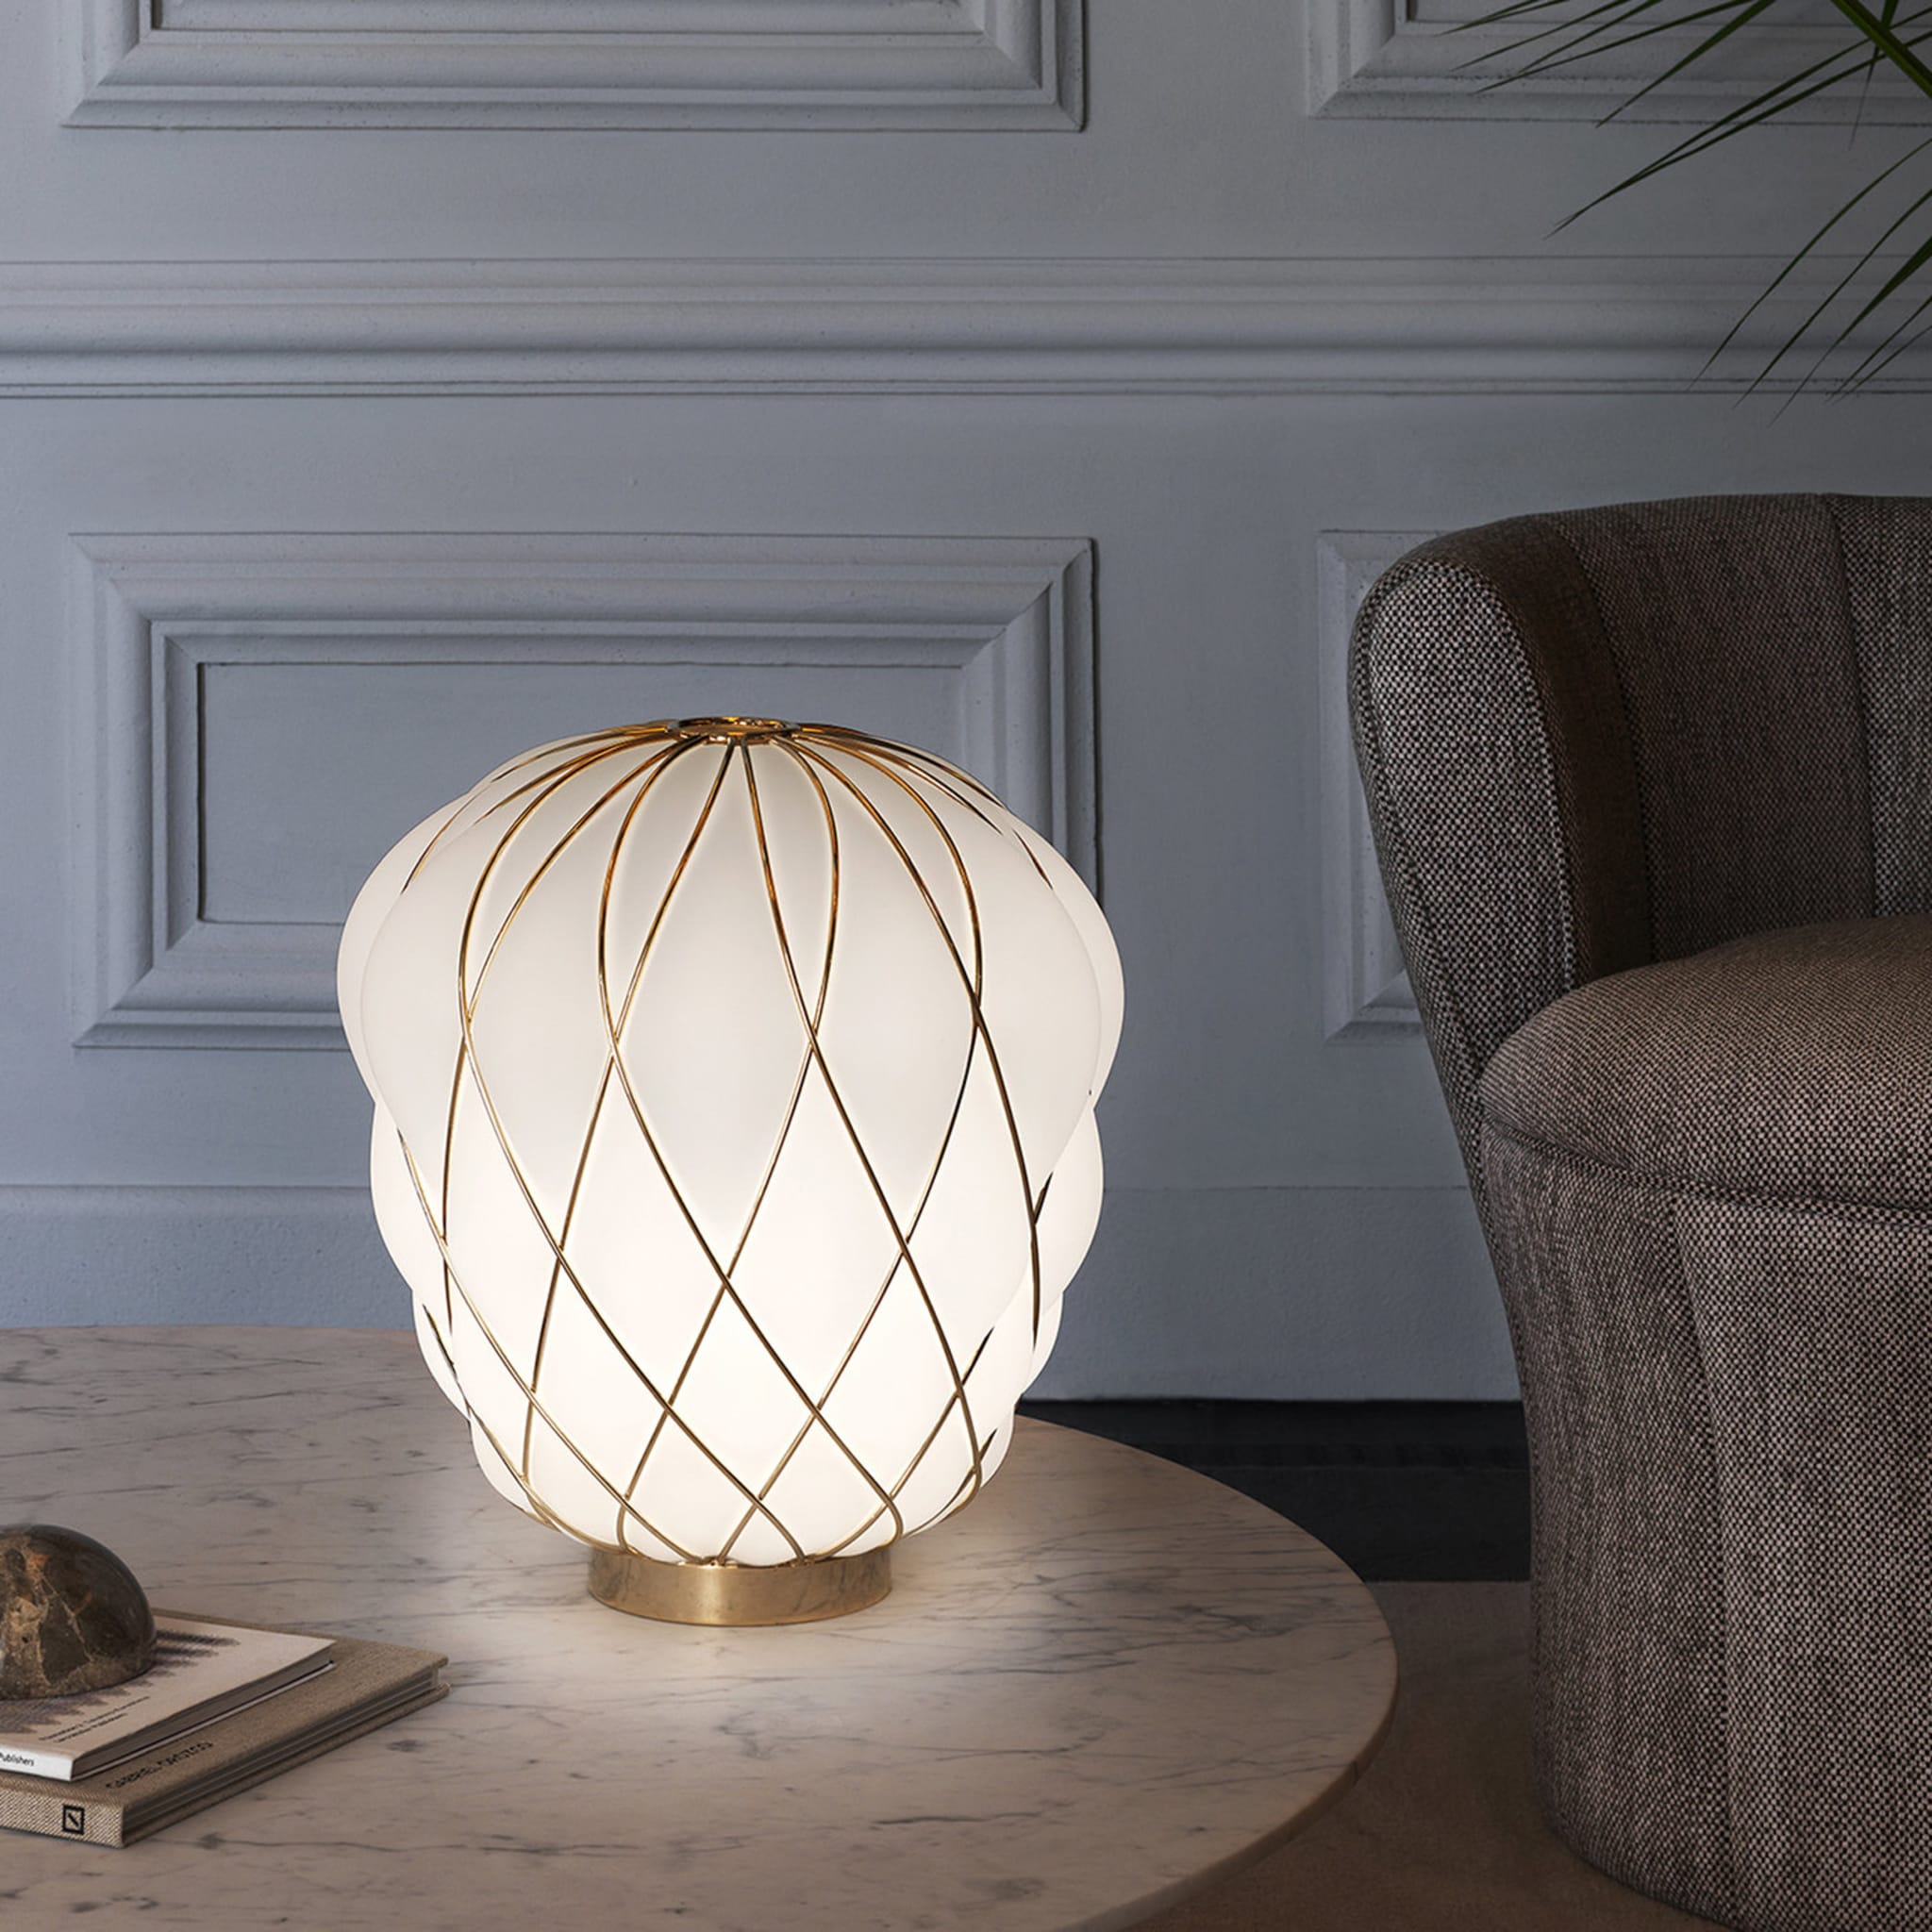 Pinecone Table Lamp by Paola Navone - Alternative view 2